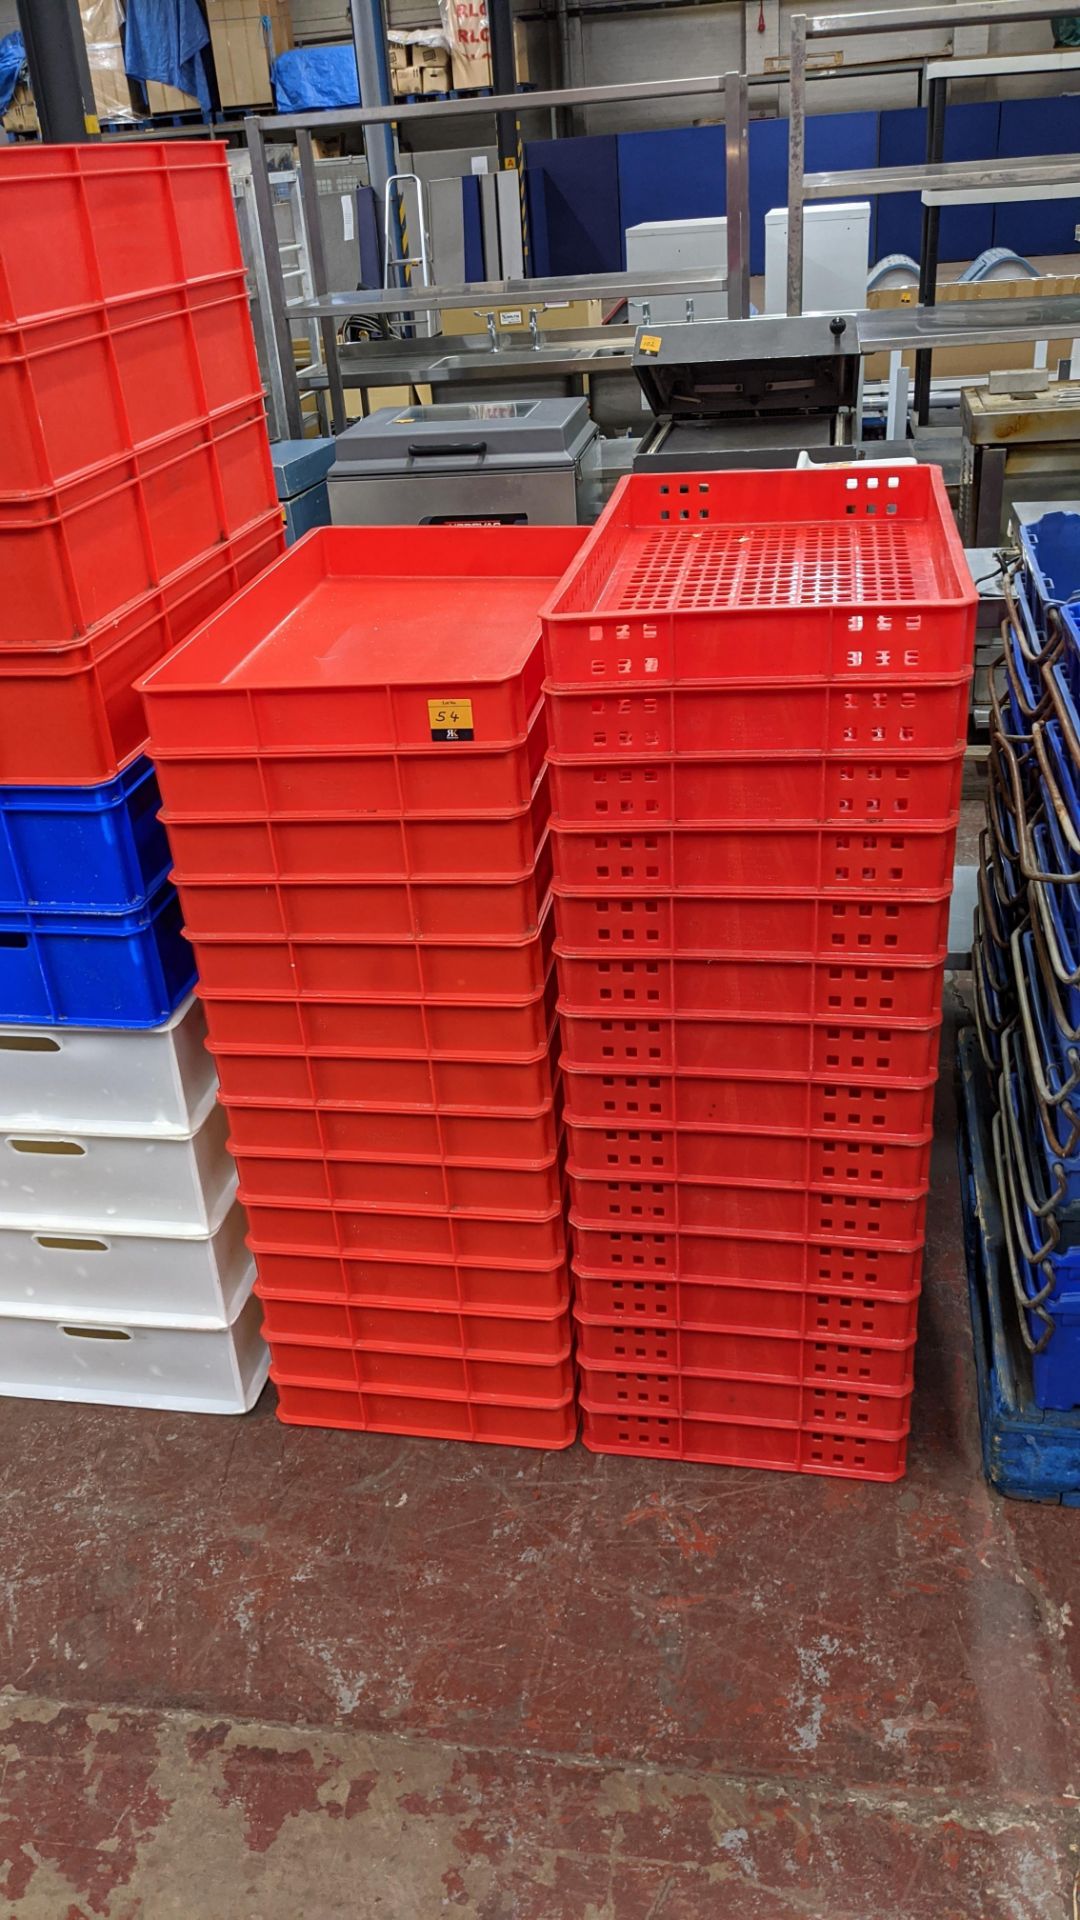 29 off red plastic stacking crates, each measuring 460mm x 760mm x 80mm, in 2 styles, one with holes